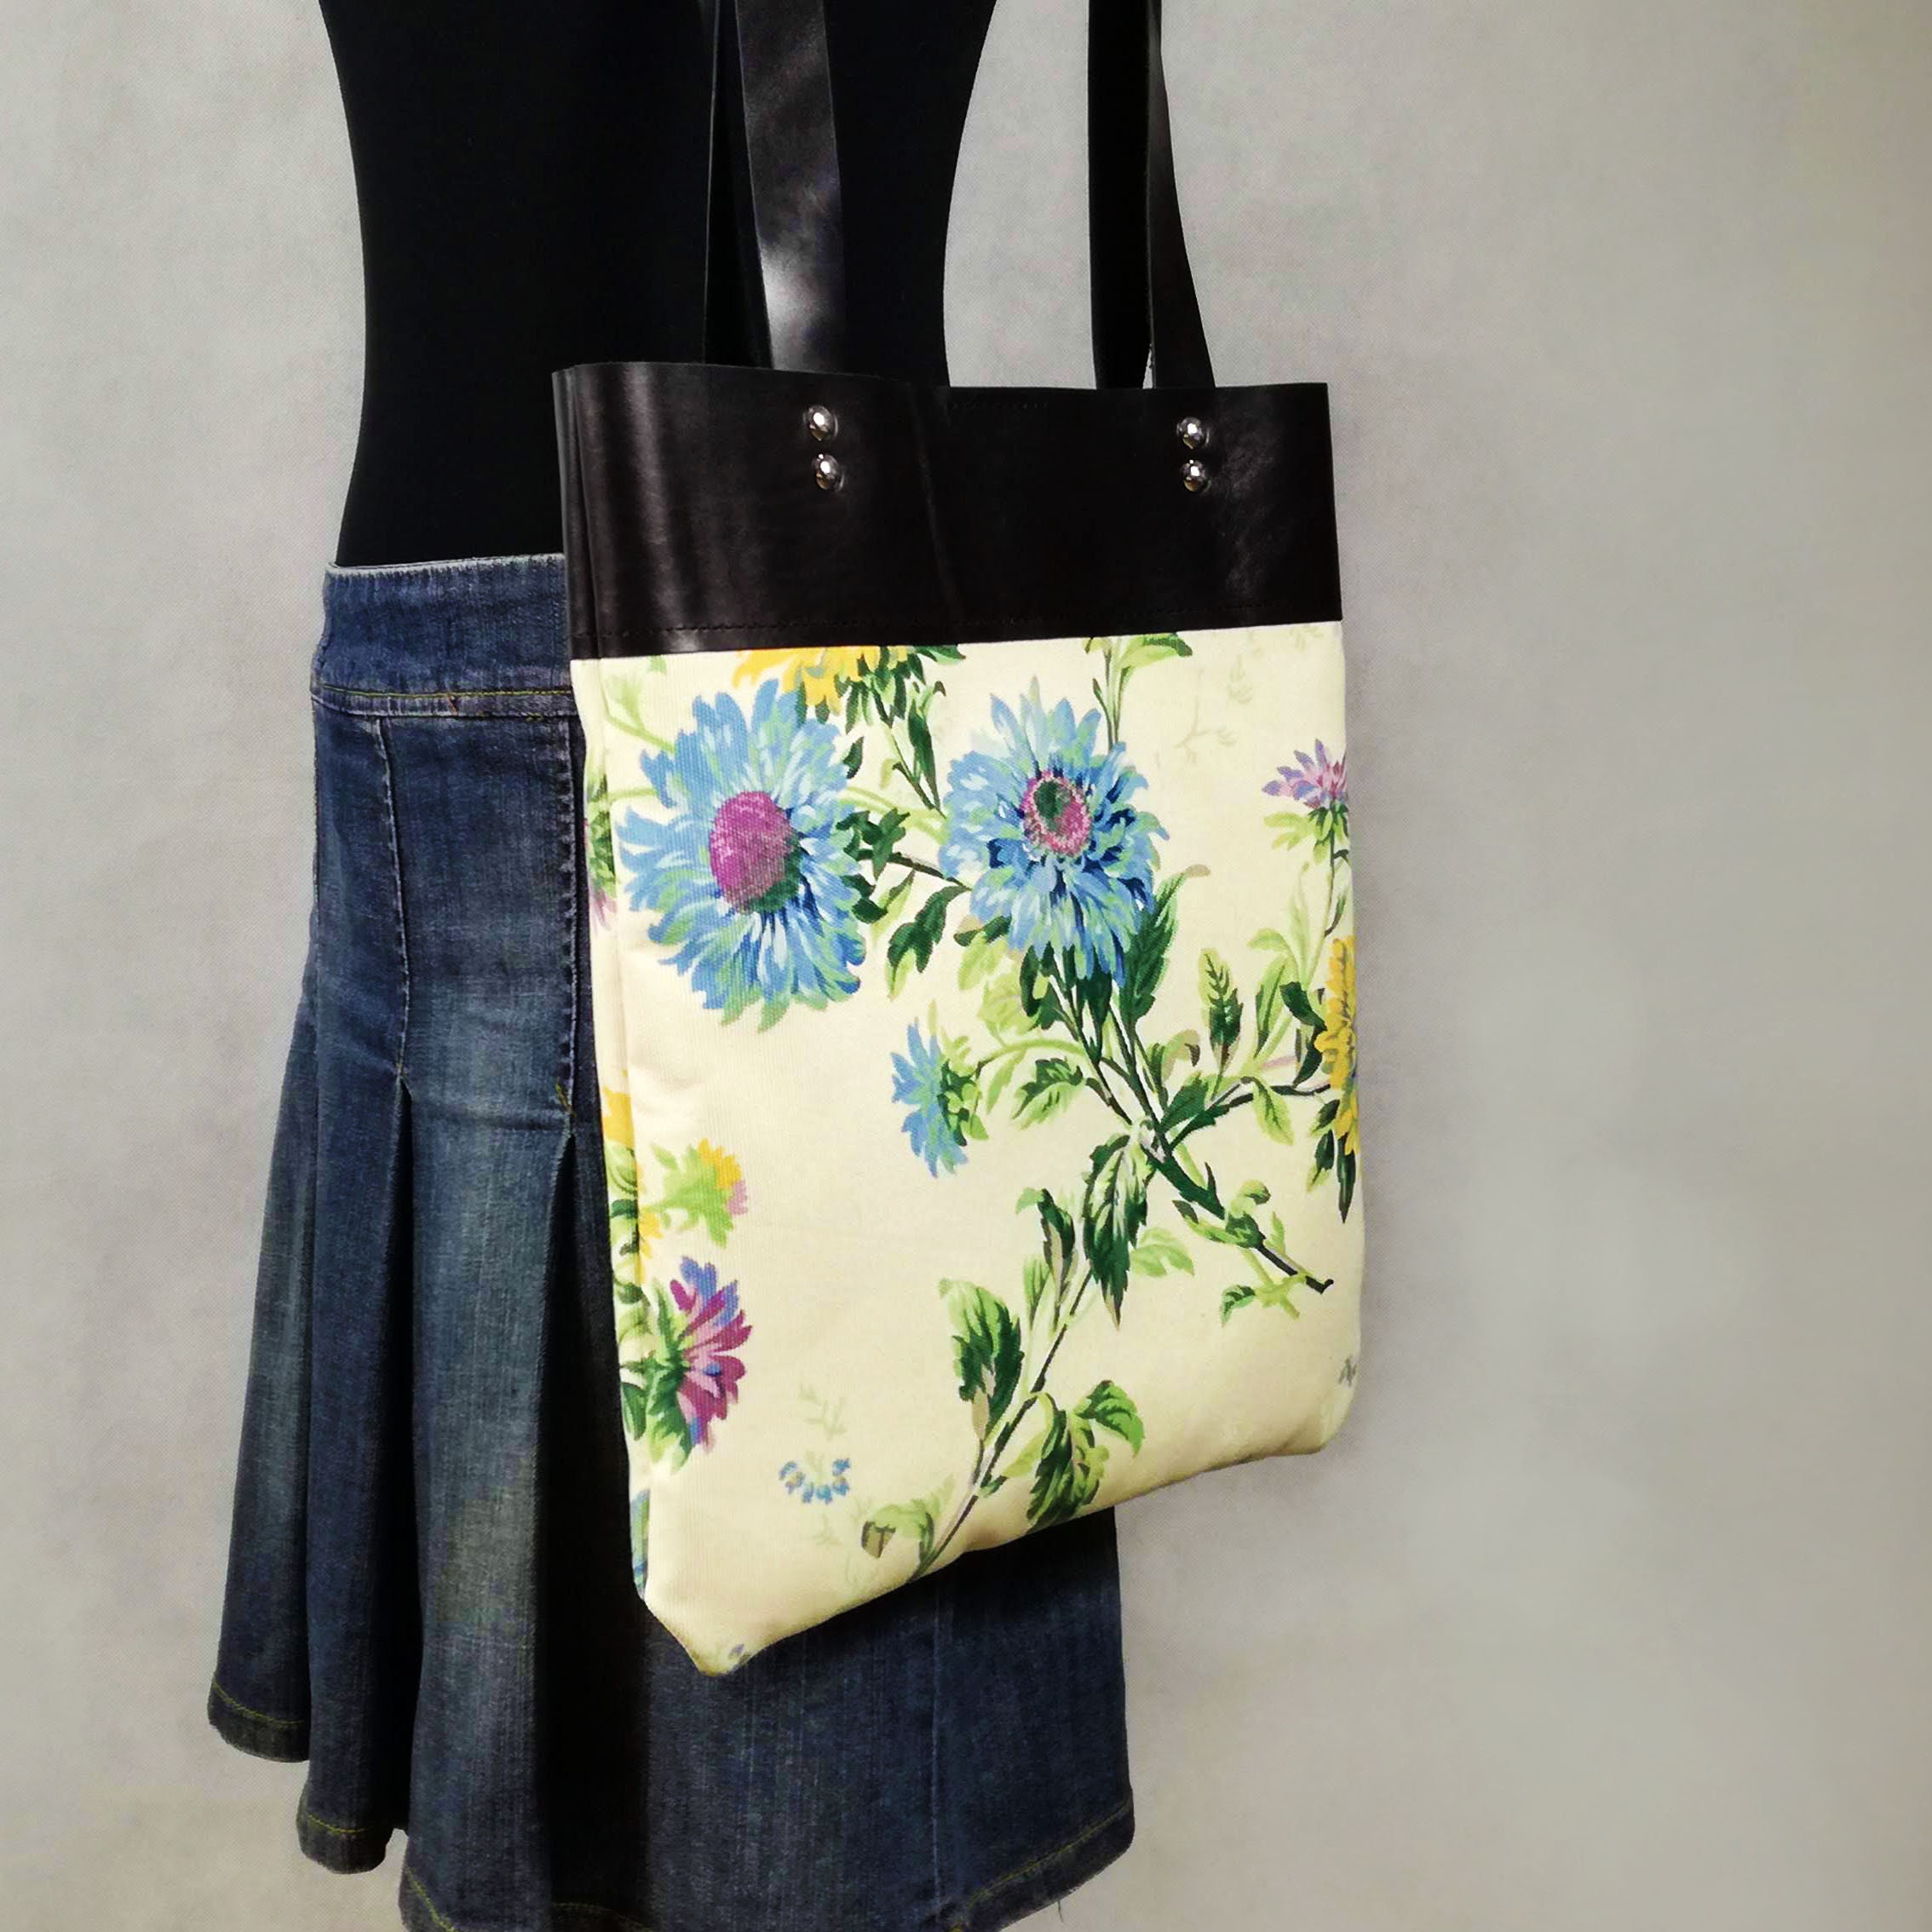 Varu Tote Bag Floral Print with leather base and straps